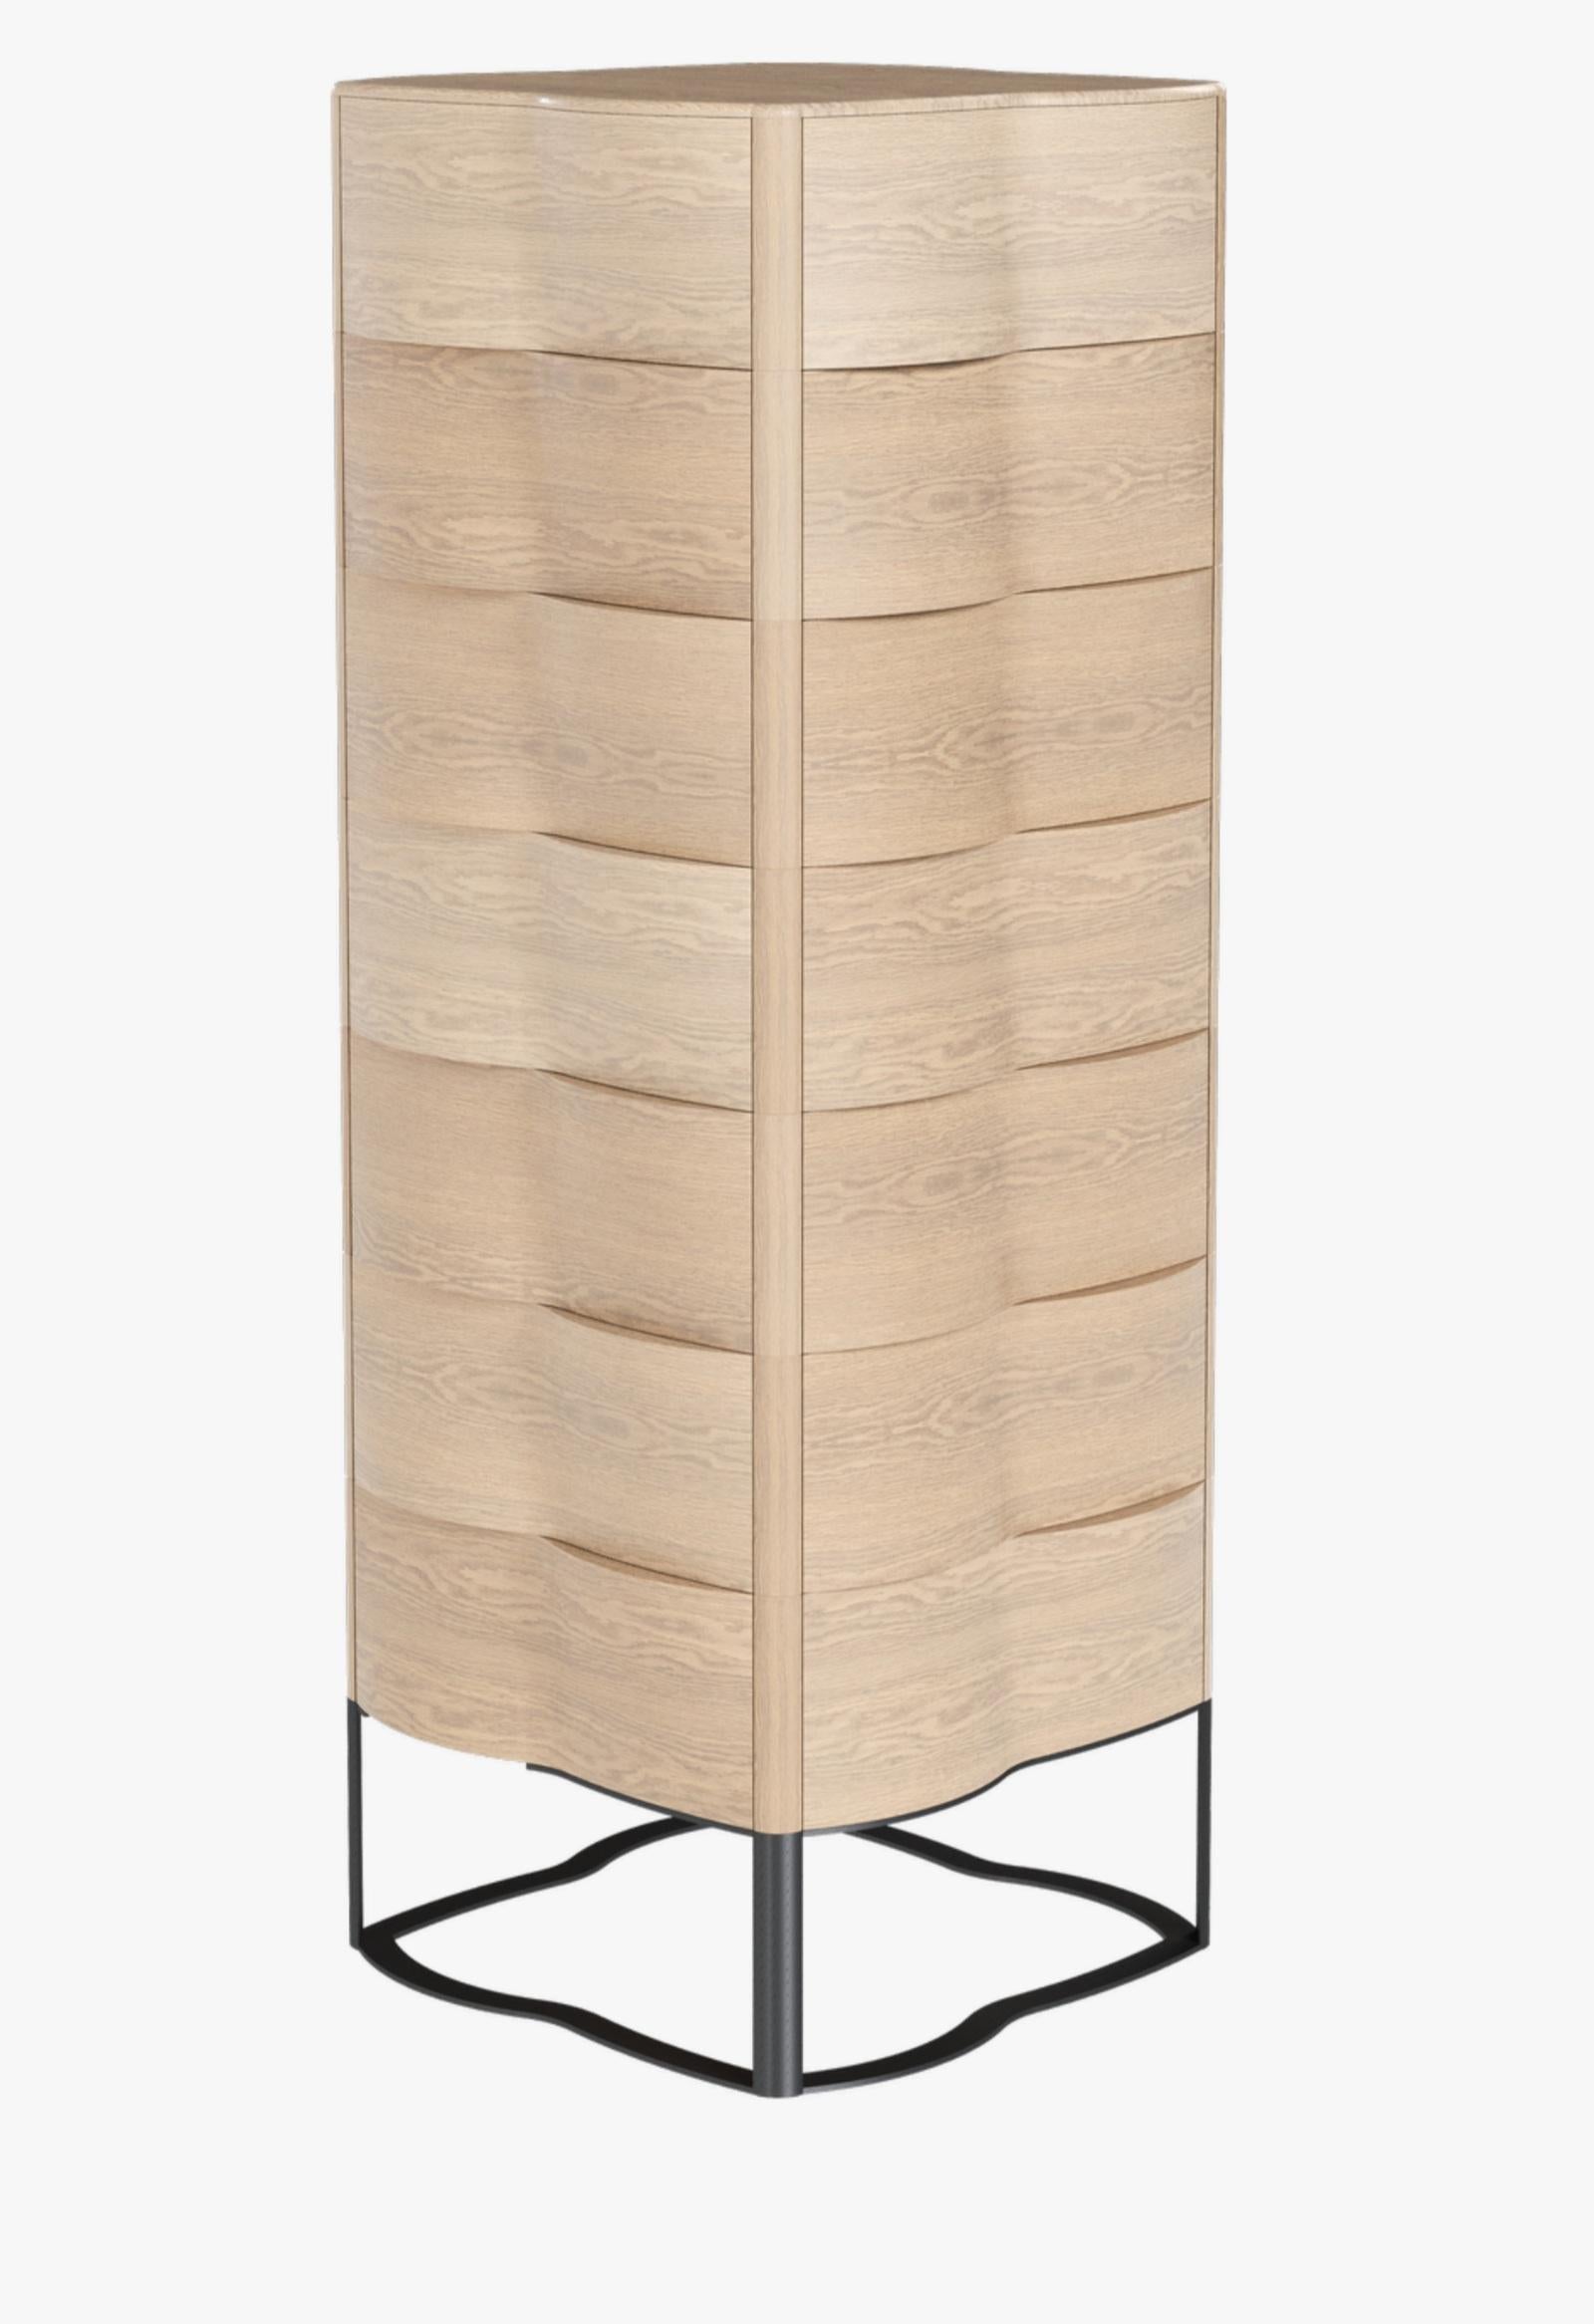 Portuguese Oak Chest of Drawers Tall Sculptural Design For Sale